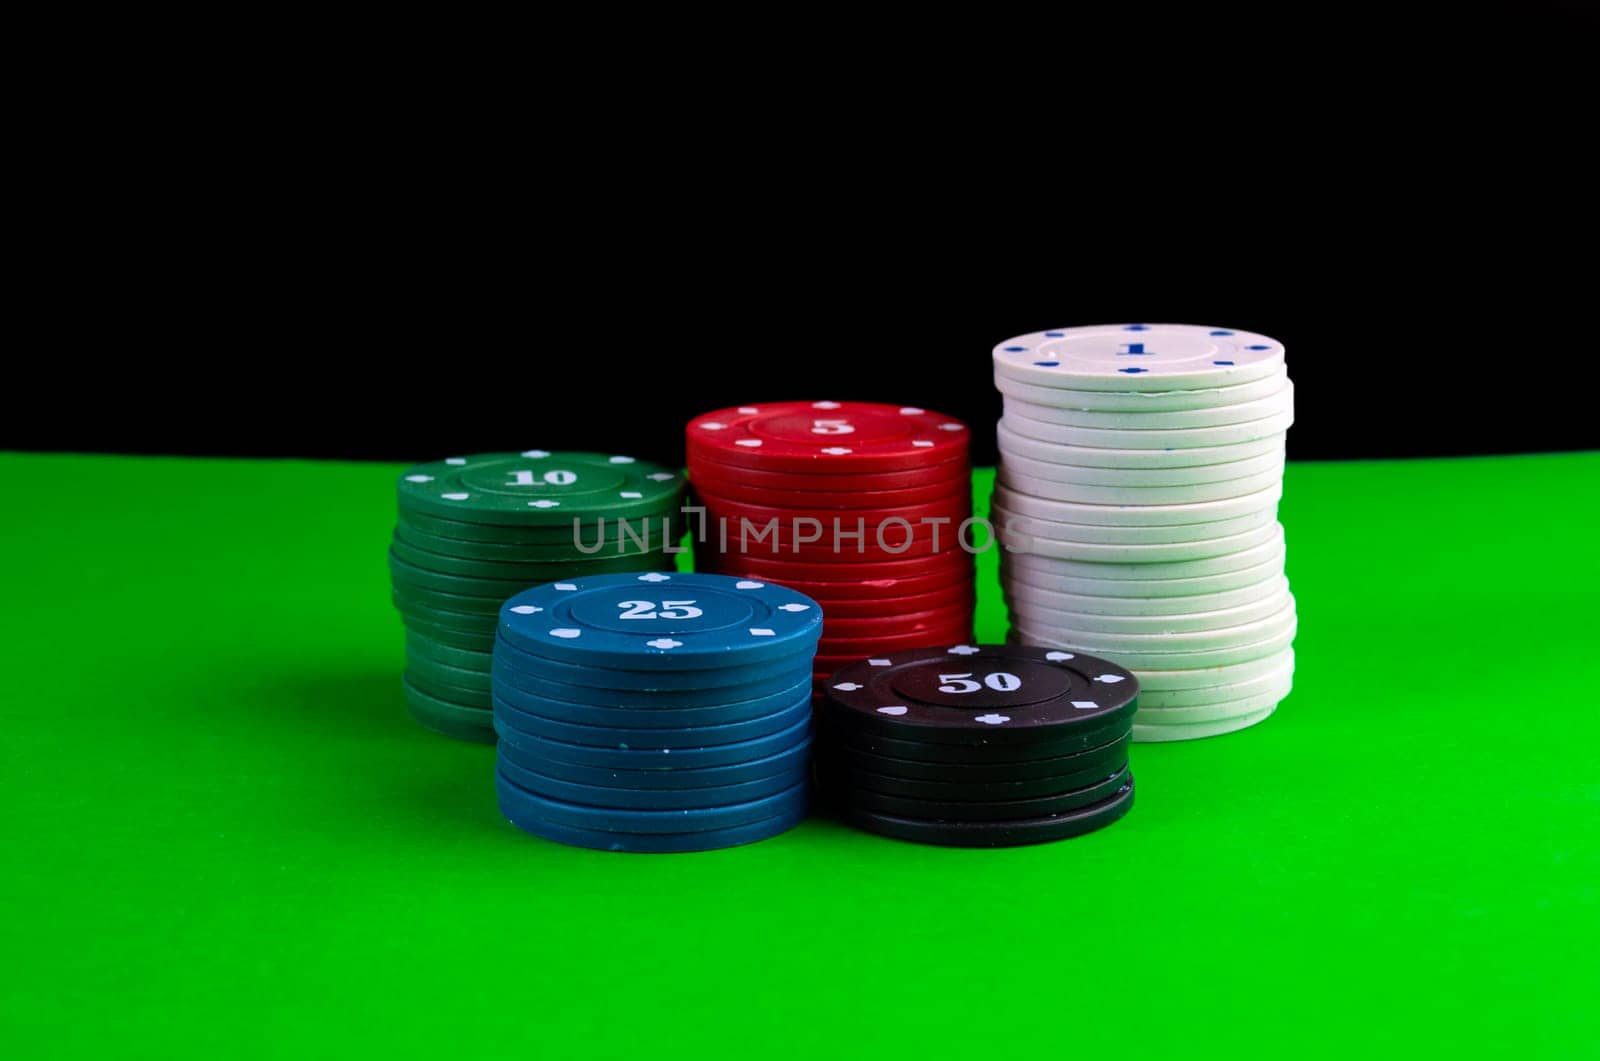 Poker game, stacks of chips on a poker table on a black background.  by Yuka777